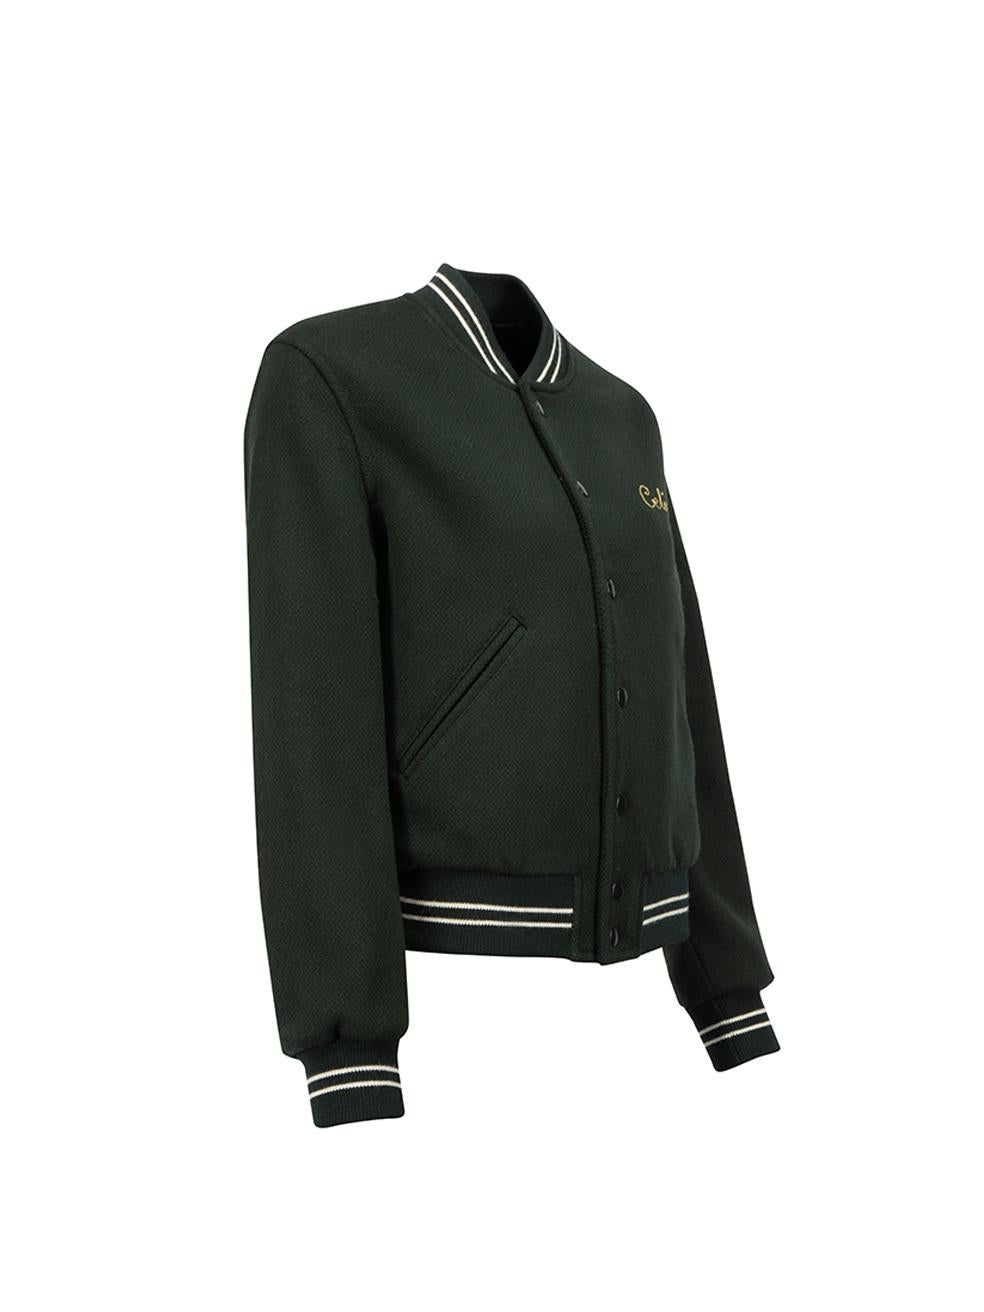 CONDITION is Very good. Hardly any visible wear to jacket is evident. There a few scuffs to the finish of the buttons on this used Céline designer resale item. 
 
 Details
  Green
 Wool
 Varsity jacket
 Front snap buttons closure
 Striped accent